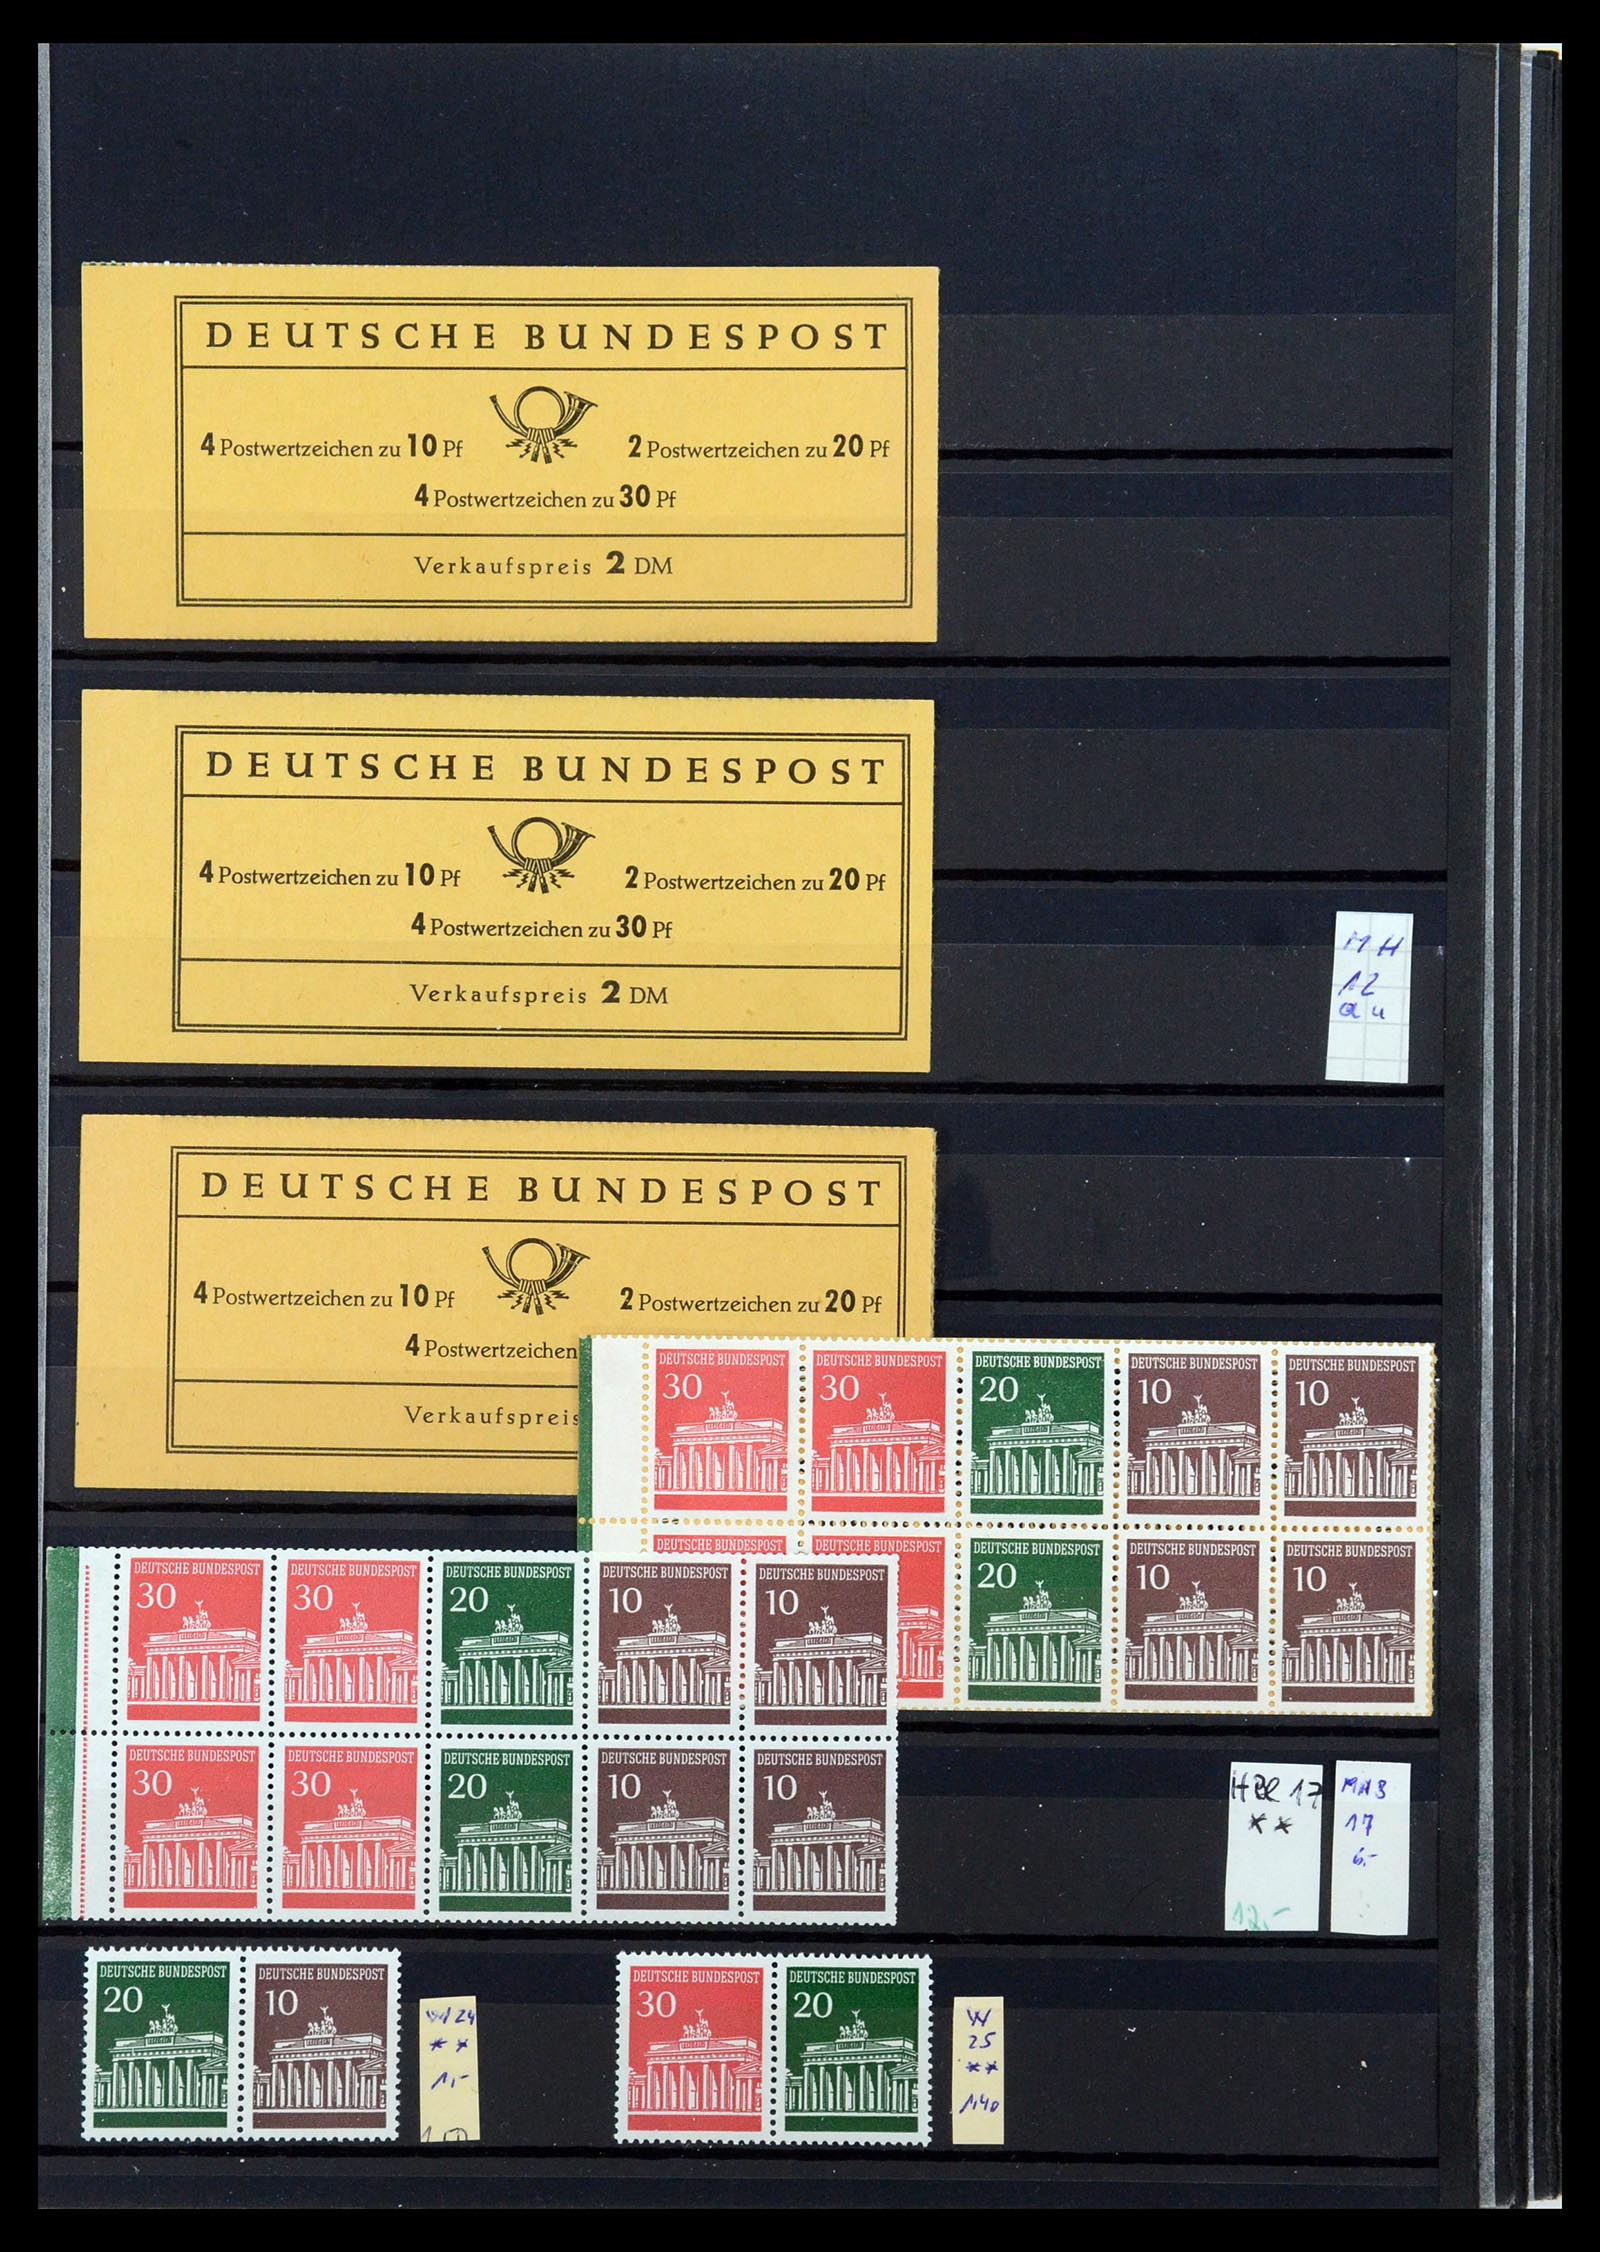 35356 015 - Stamp Collection 35356 Bundespost stamp booklets and combinations 1951-2